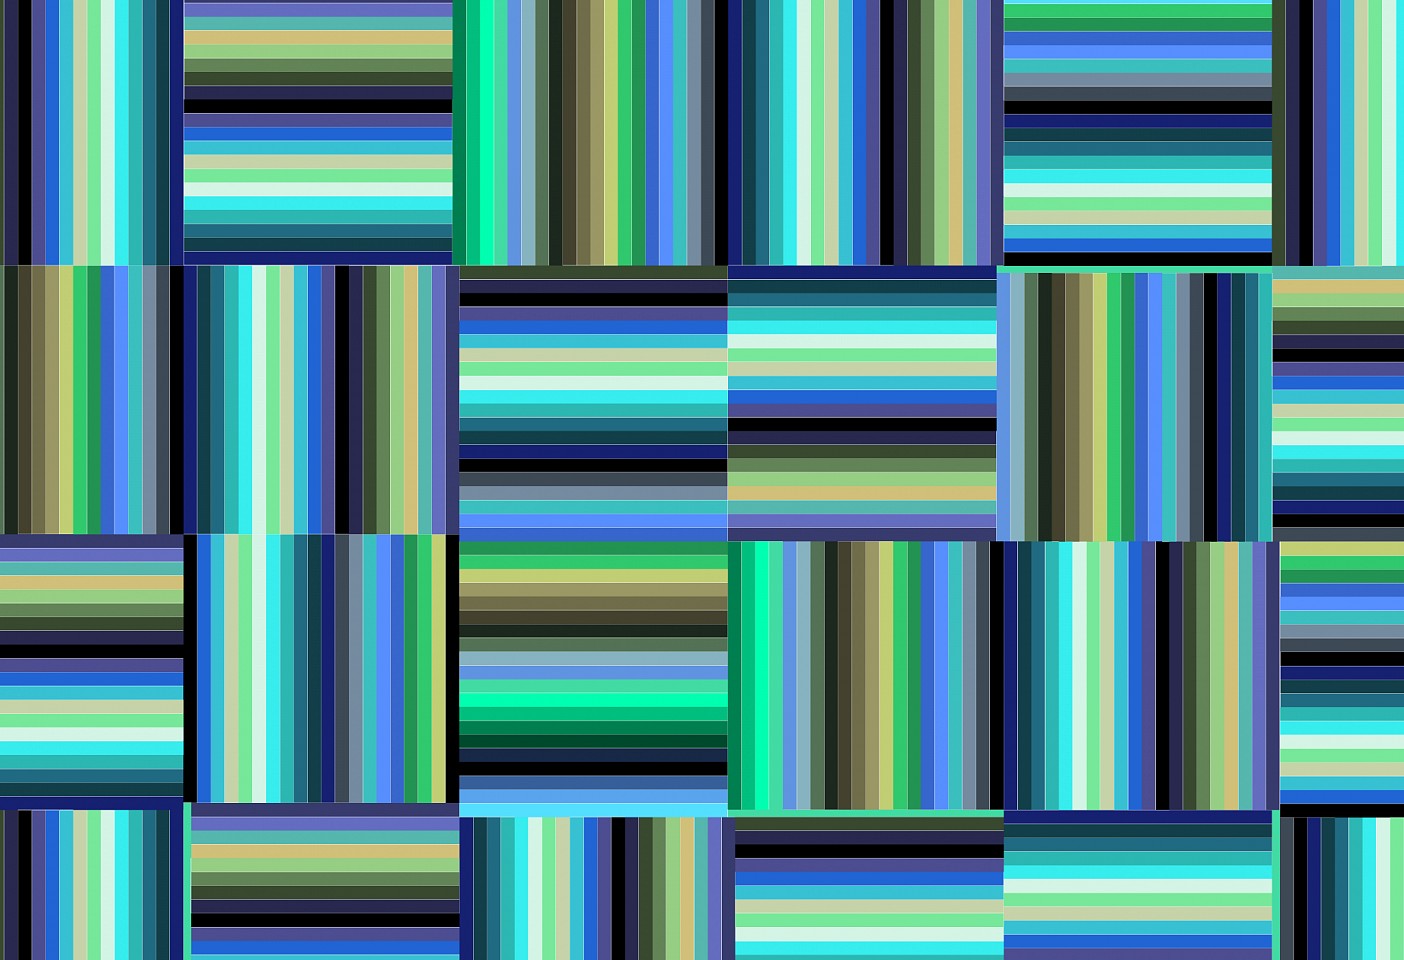 Dane Albert, Color Bars #14, 2023
Acrylic on canvas (Concept), 48 x 72 in. (121.9 x 182.9 cm)
Series of colored lines and shapes in multiple configurations
DA.2023.bars-014